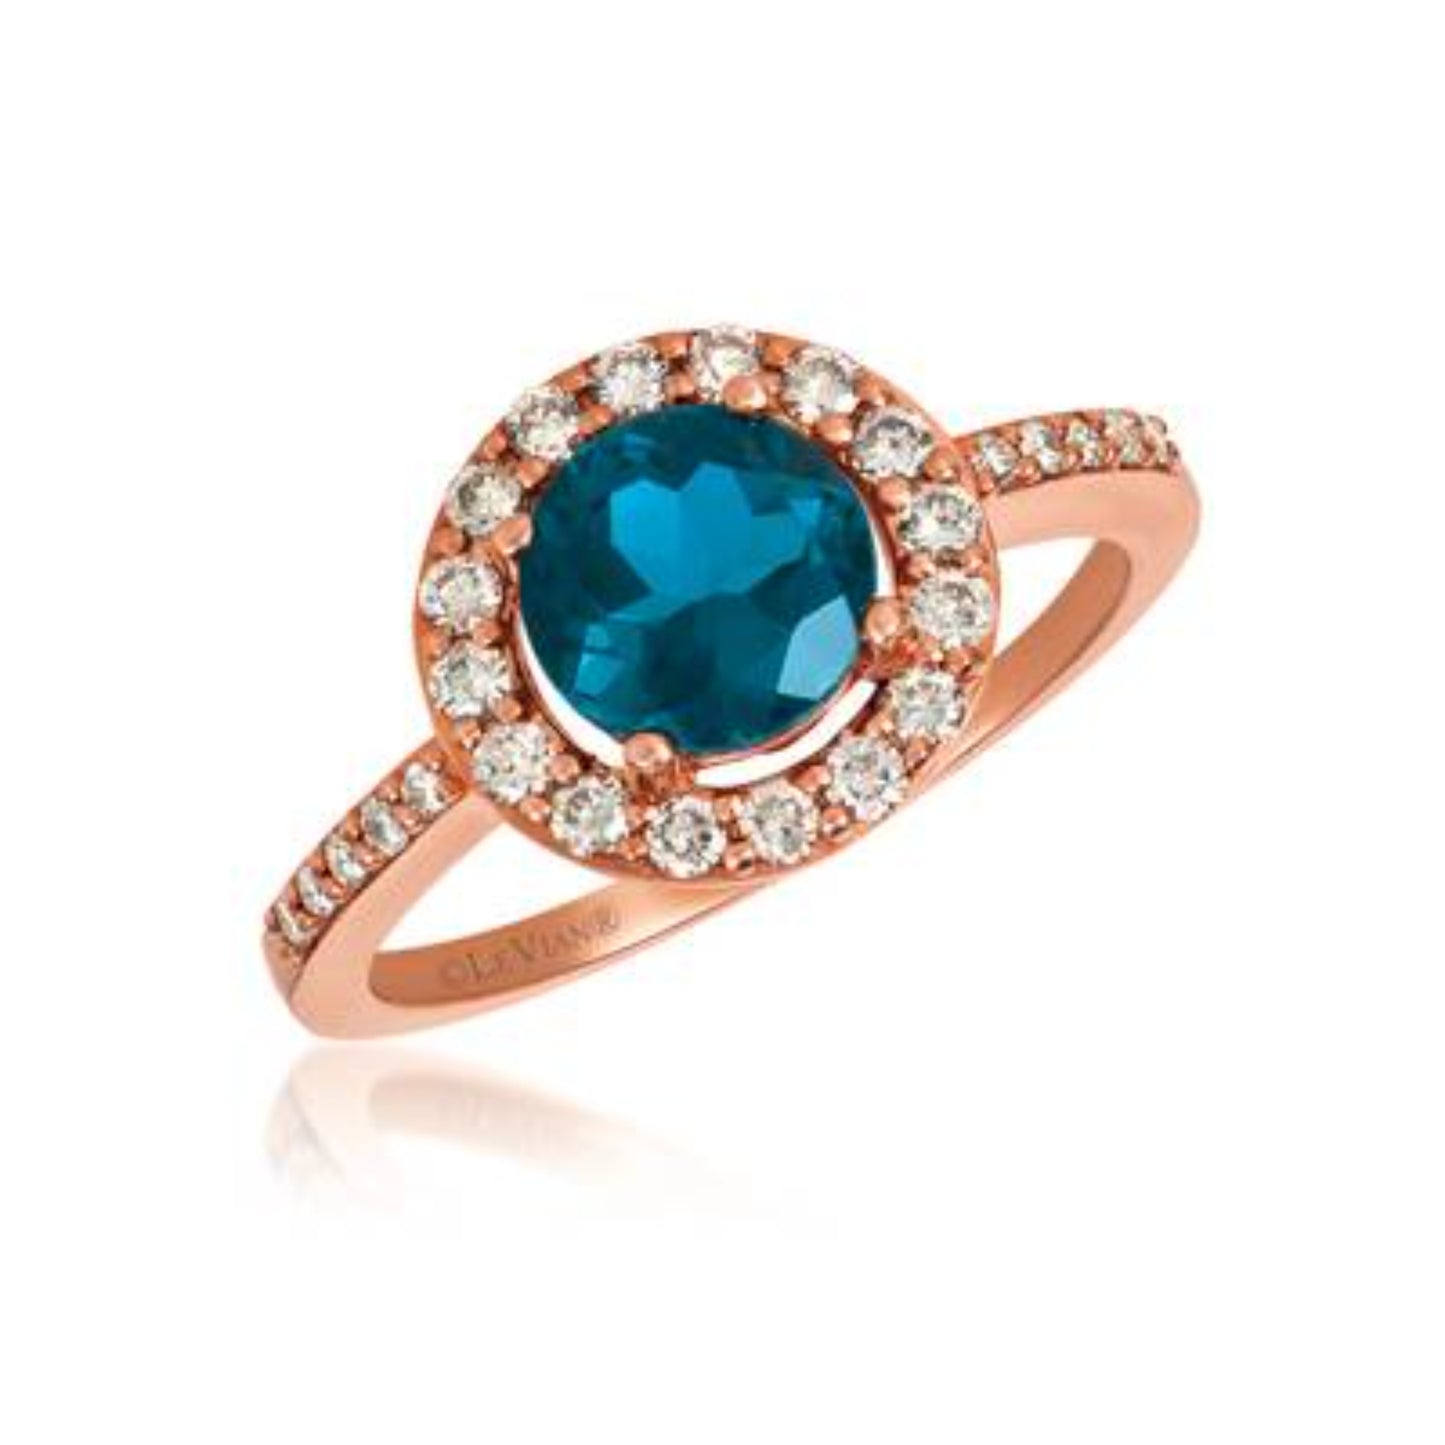 14K Rose Gold® Deep Sea Blue Topaz™ 1 3/8 cts. Ring with Nude Diamonds™ 3/8 cts. WJGF26 | R22322